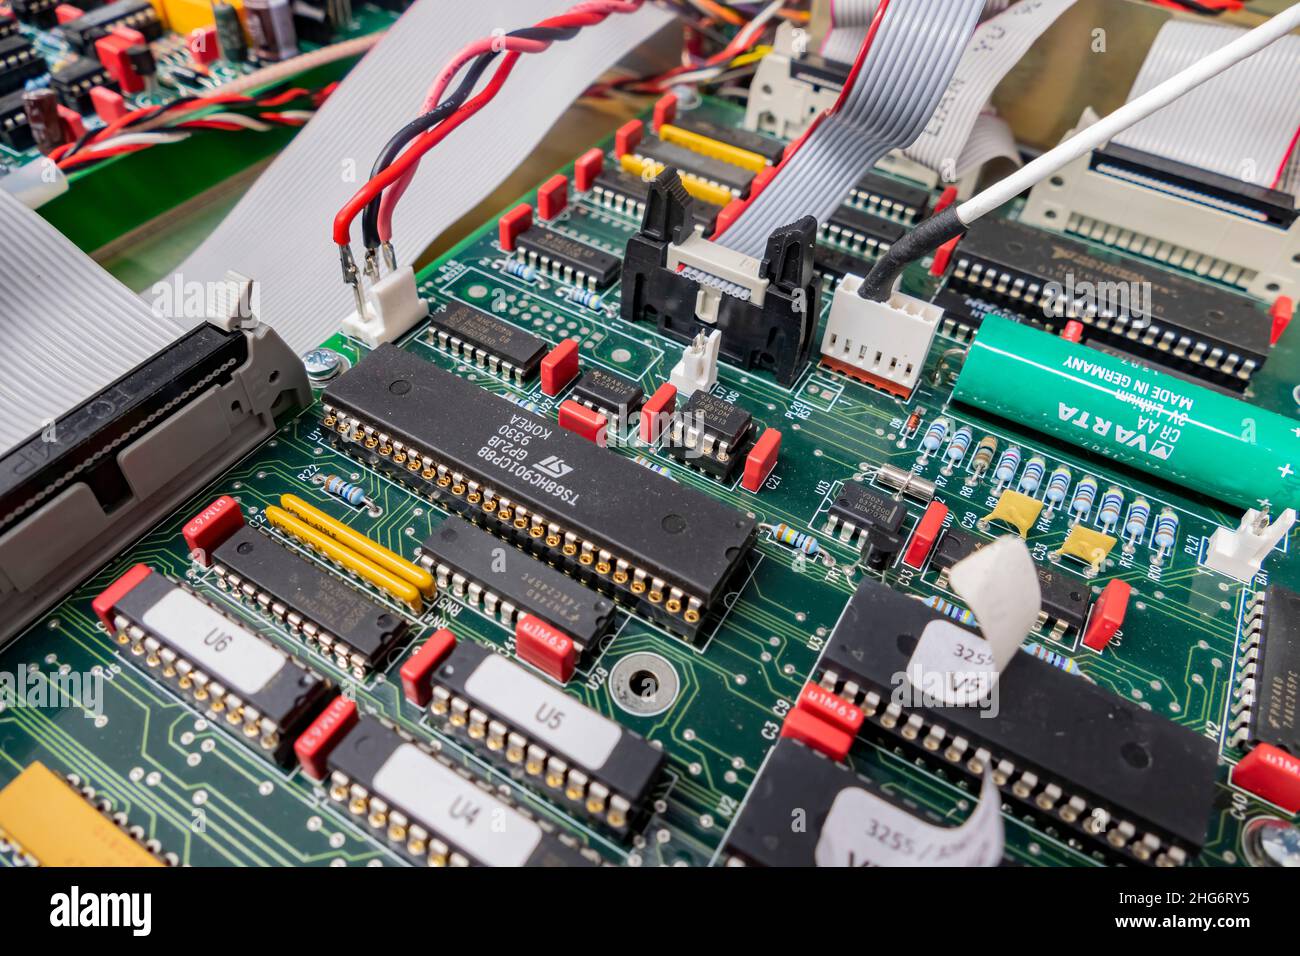 United Kingdom, APR 29 2015 - Close up shot of integrated circuit mainboard Stock Photo